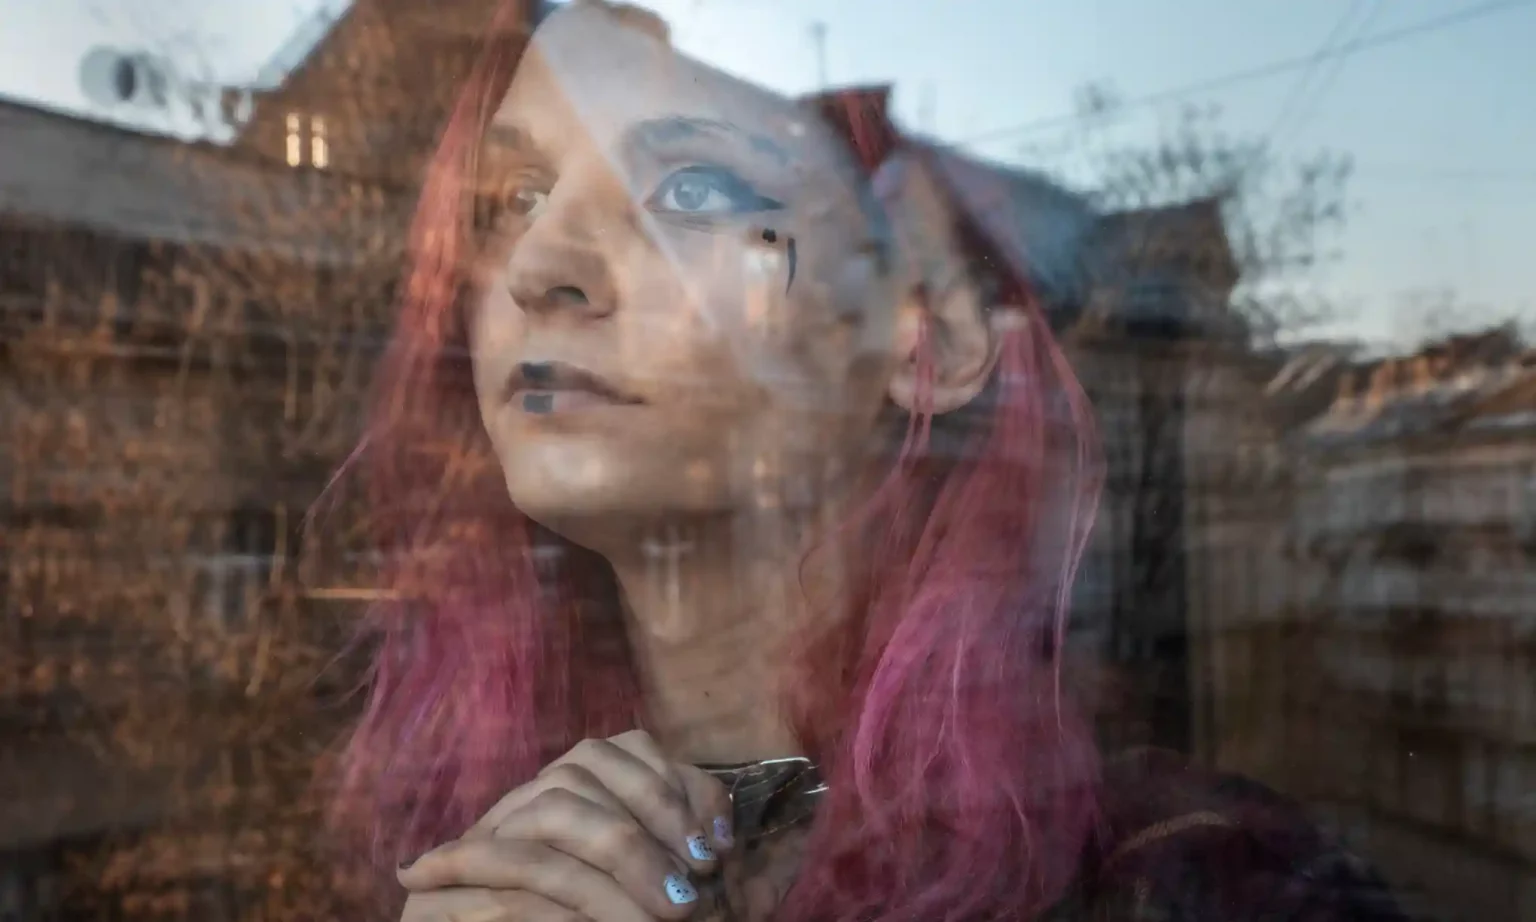 Judis, a transgender woman trapped in Ukraine: ‘I will try again to cross the border because it’s my right to leave and to live.’ Photograph: Alessio Mamo/The Guardian